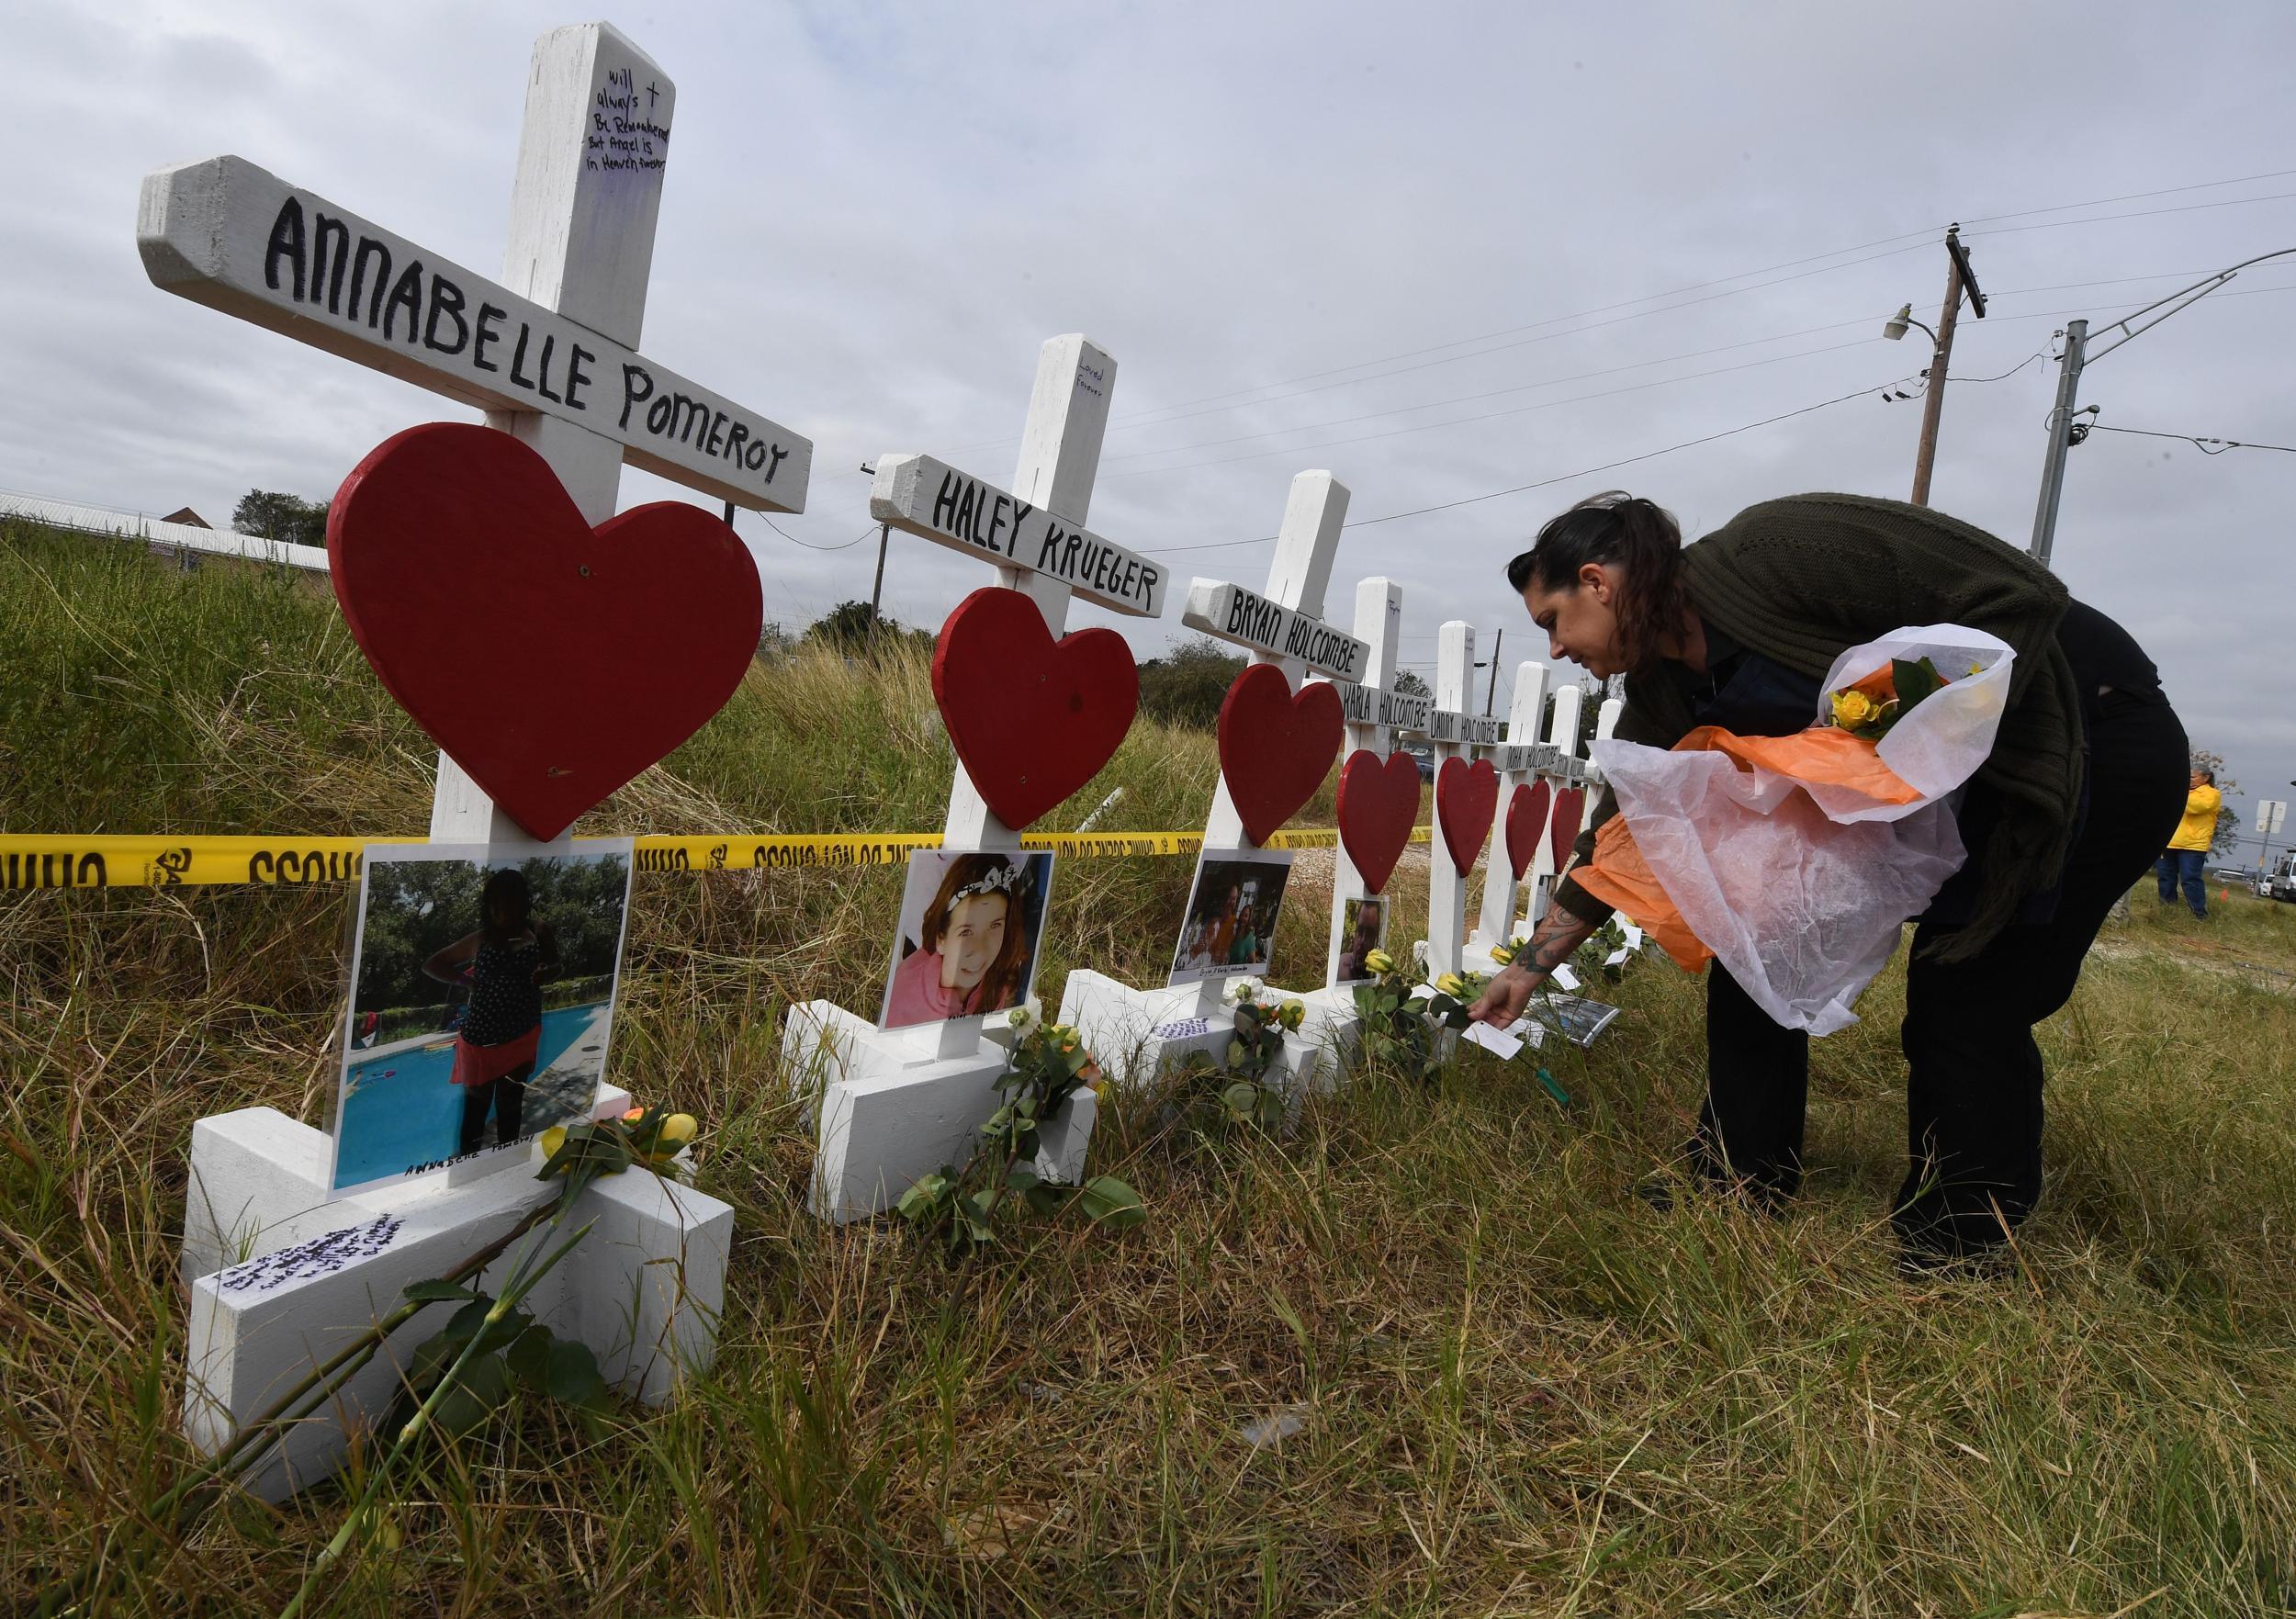 Jessica Mires leaves flowers on crosses named for the victims outside the First Baptist Church, where a mass shooting that killed 26 people